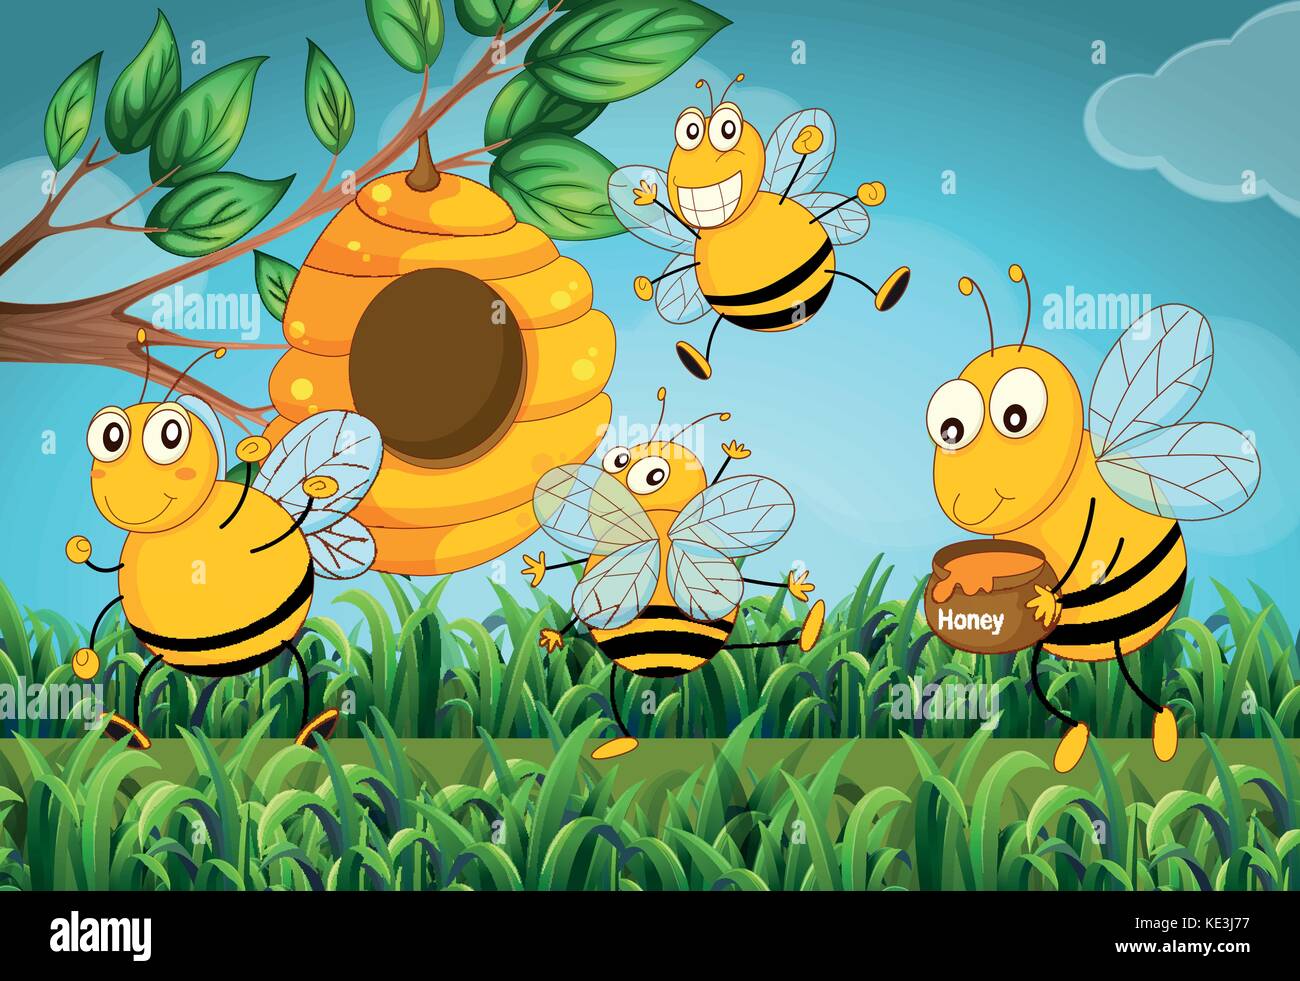 Four Bees Flying Around The Beehive Illustration Stock Vector Image Art Alamy